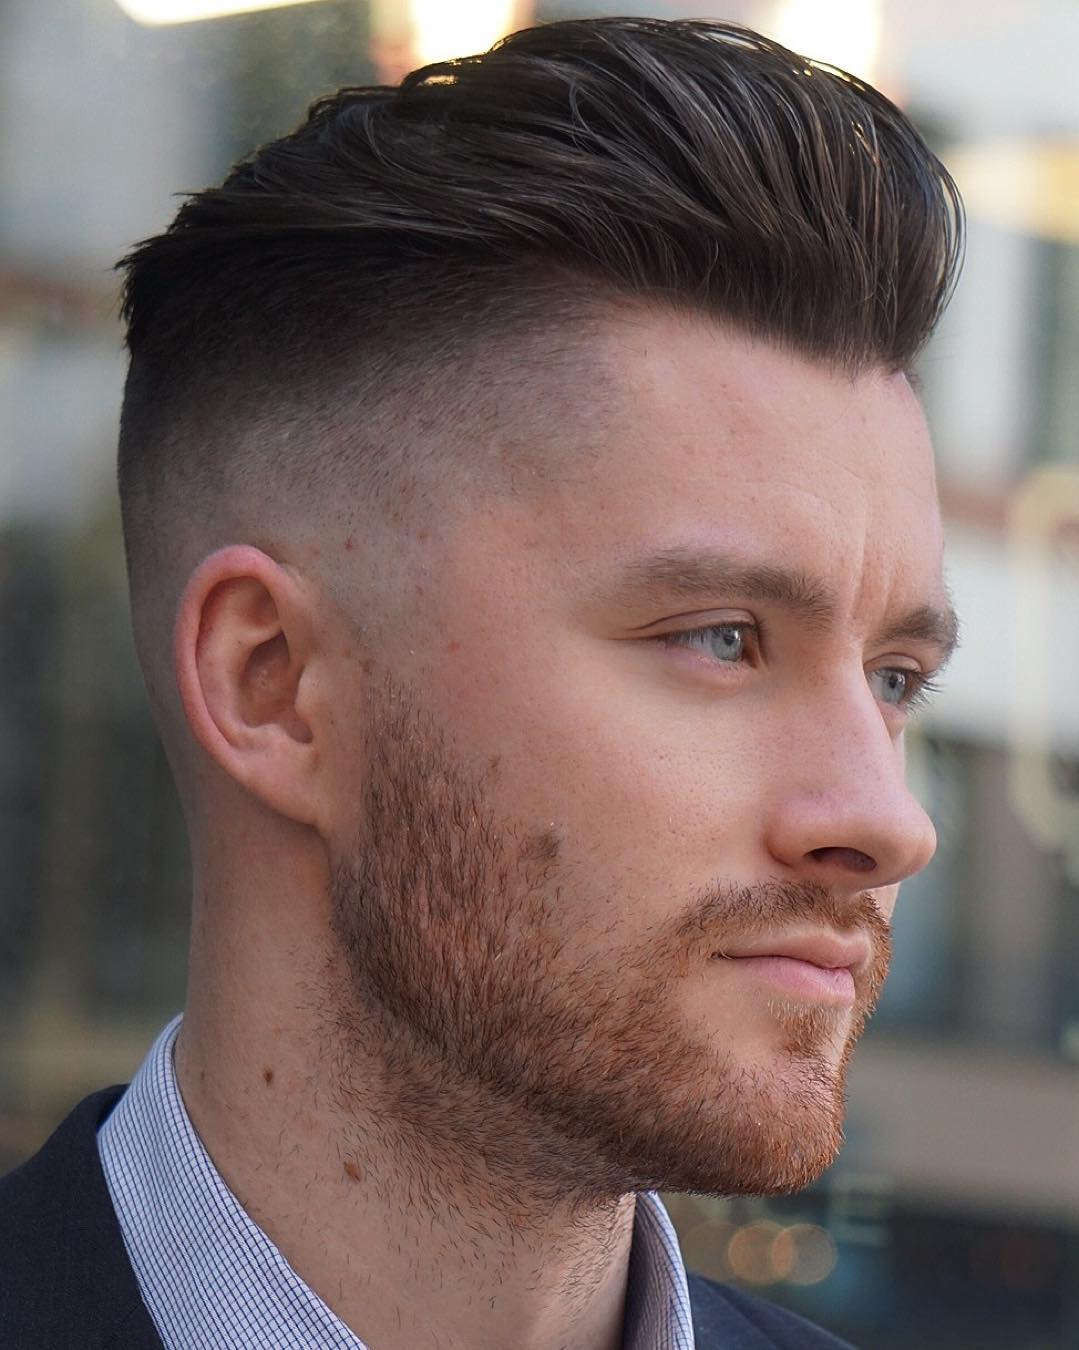 Guy Undercut Hairstyle
 50 Stylish Undercut Hairstyle Variations to copy in 2019